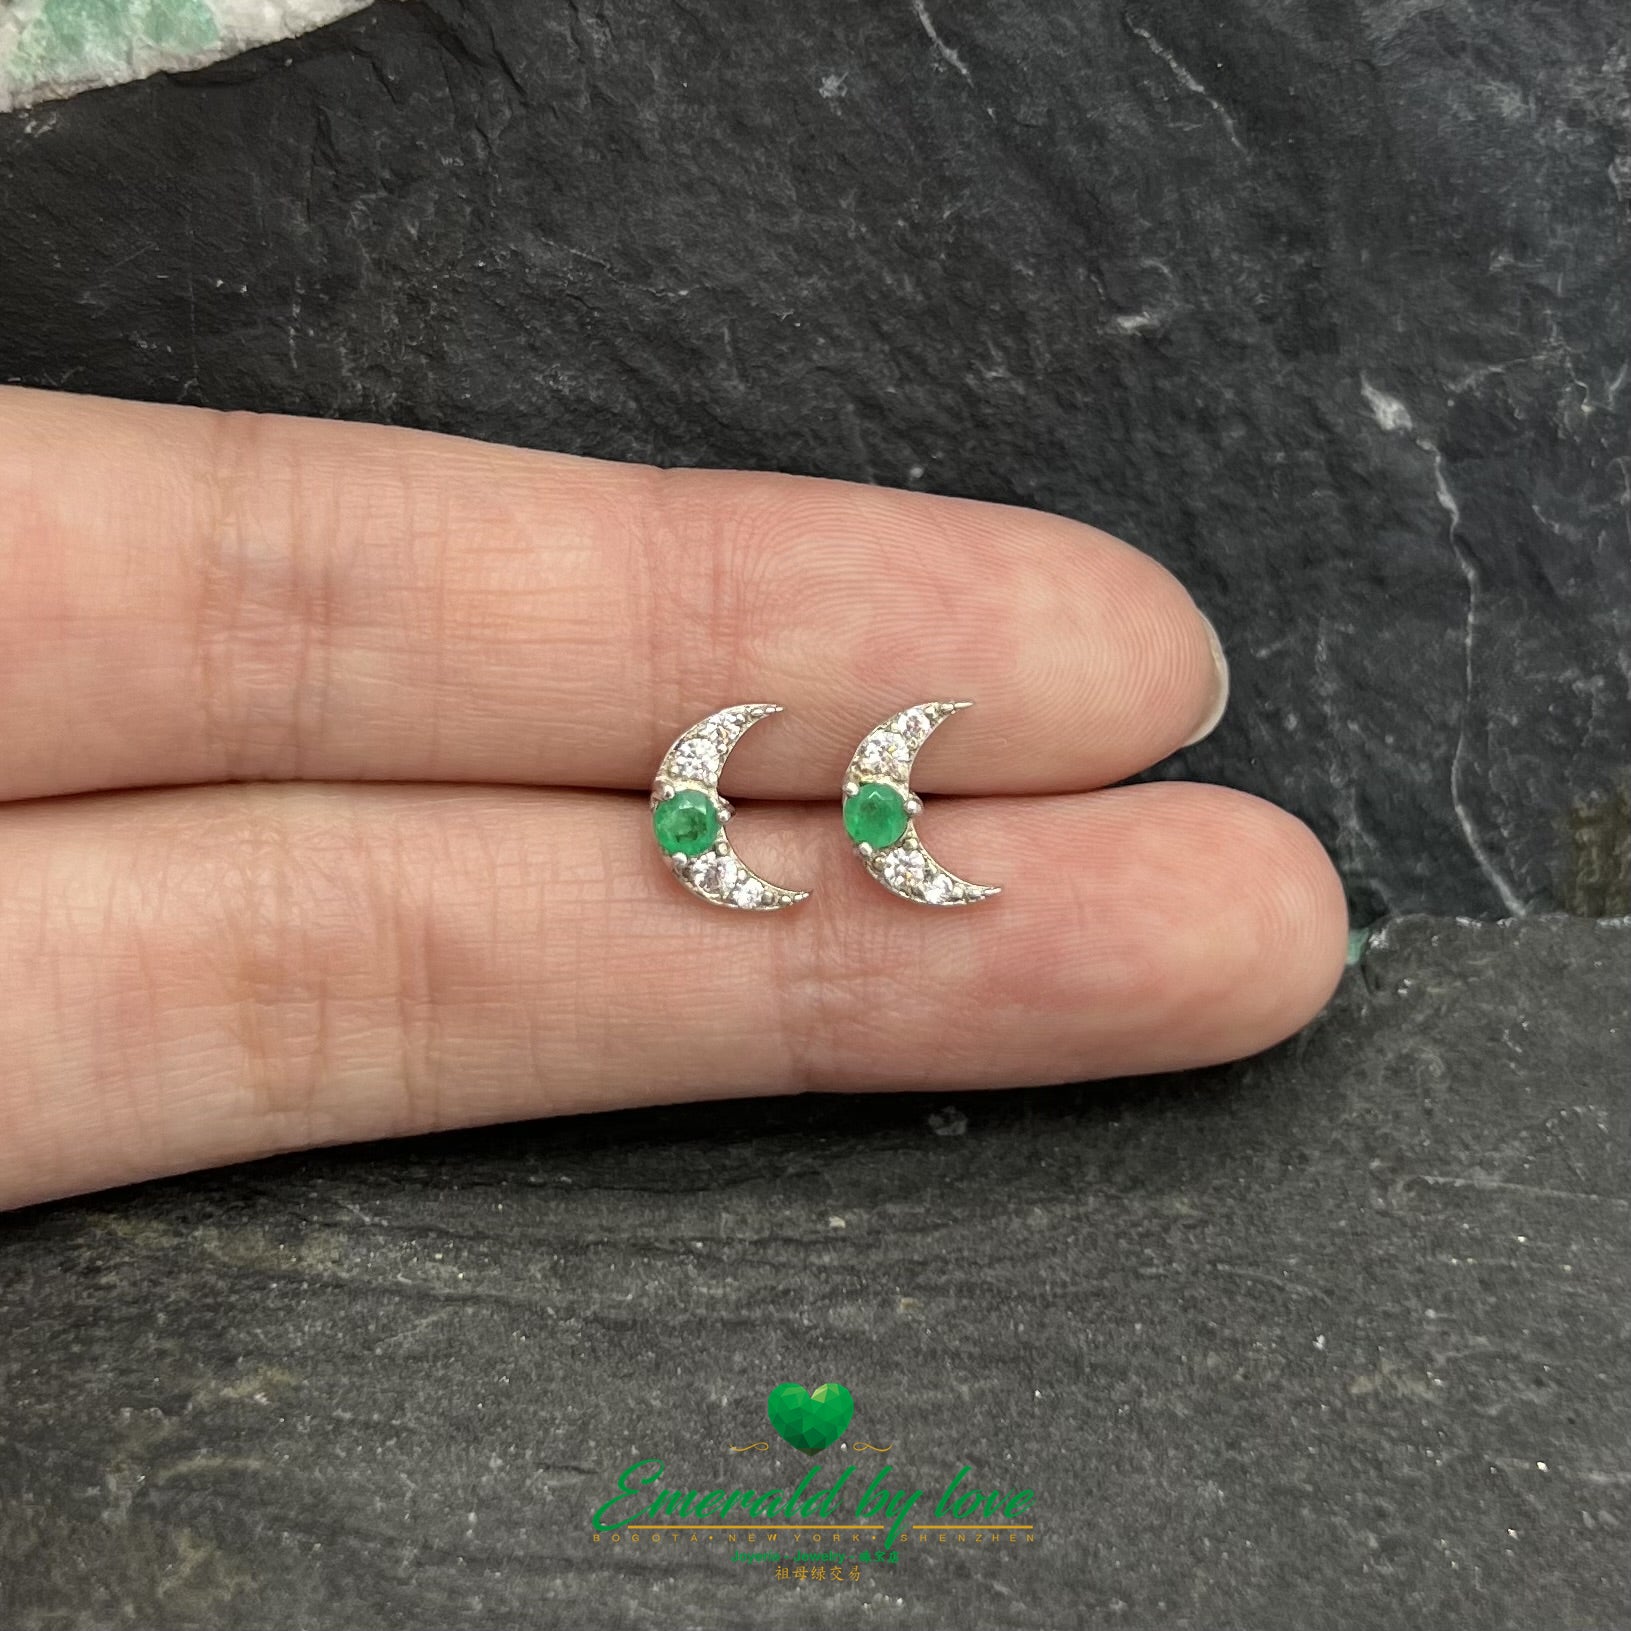 Sterling Silver Crescent Moon Design Earrings with Round Central Emerald